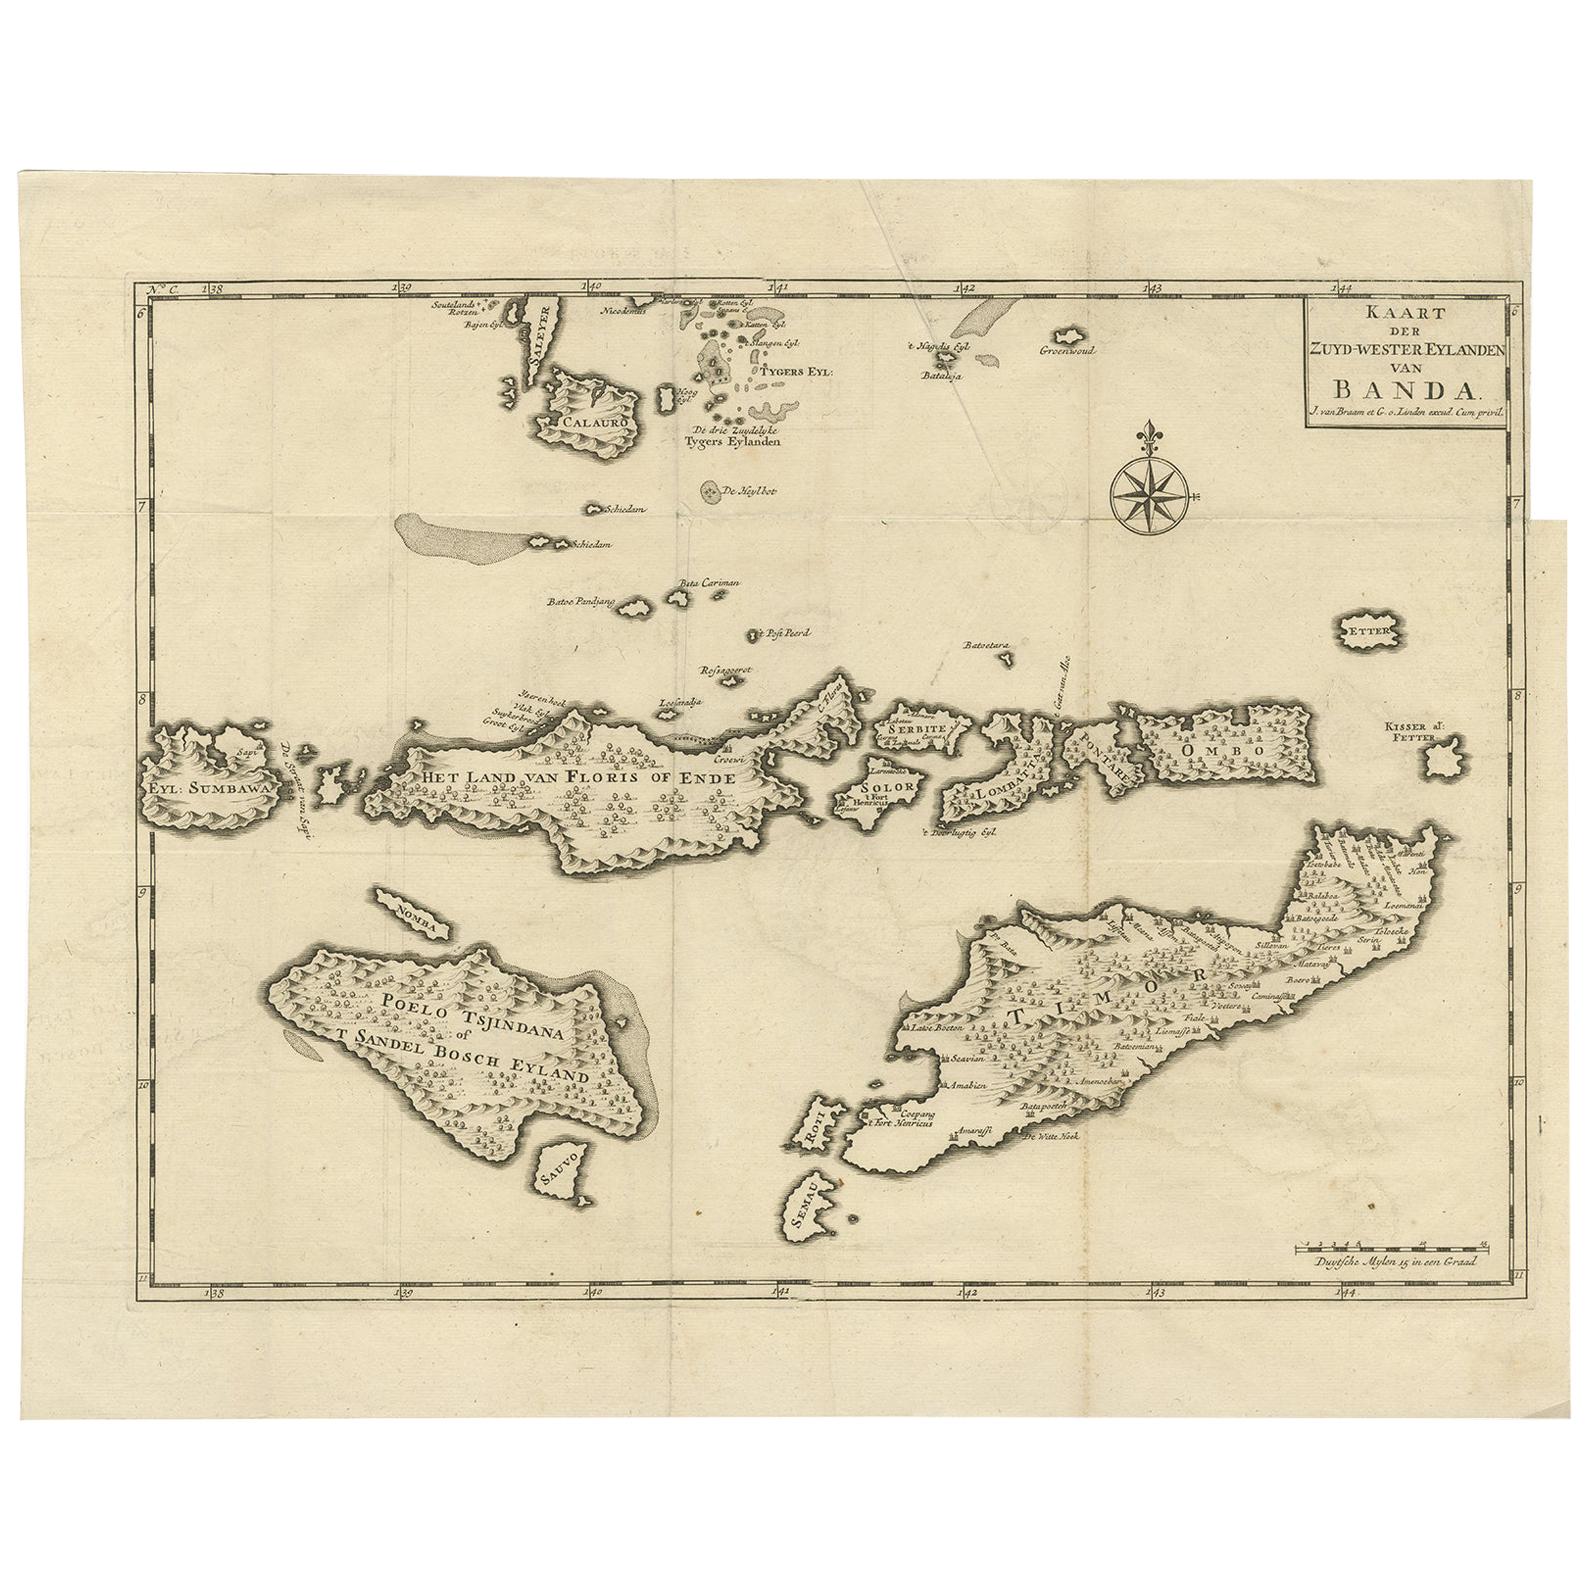 Antique map Indonesia titled 'Kaart der Zuyd-Wester Eylanden van Banda'. Map of the islands in the southwestern part of the Banda Sea including Sumba, Flores and Timor. This map originates from 'Oud en Nieuw Oost-Indiën' by F. Valentijn.